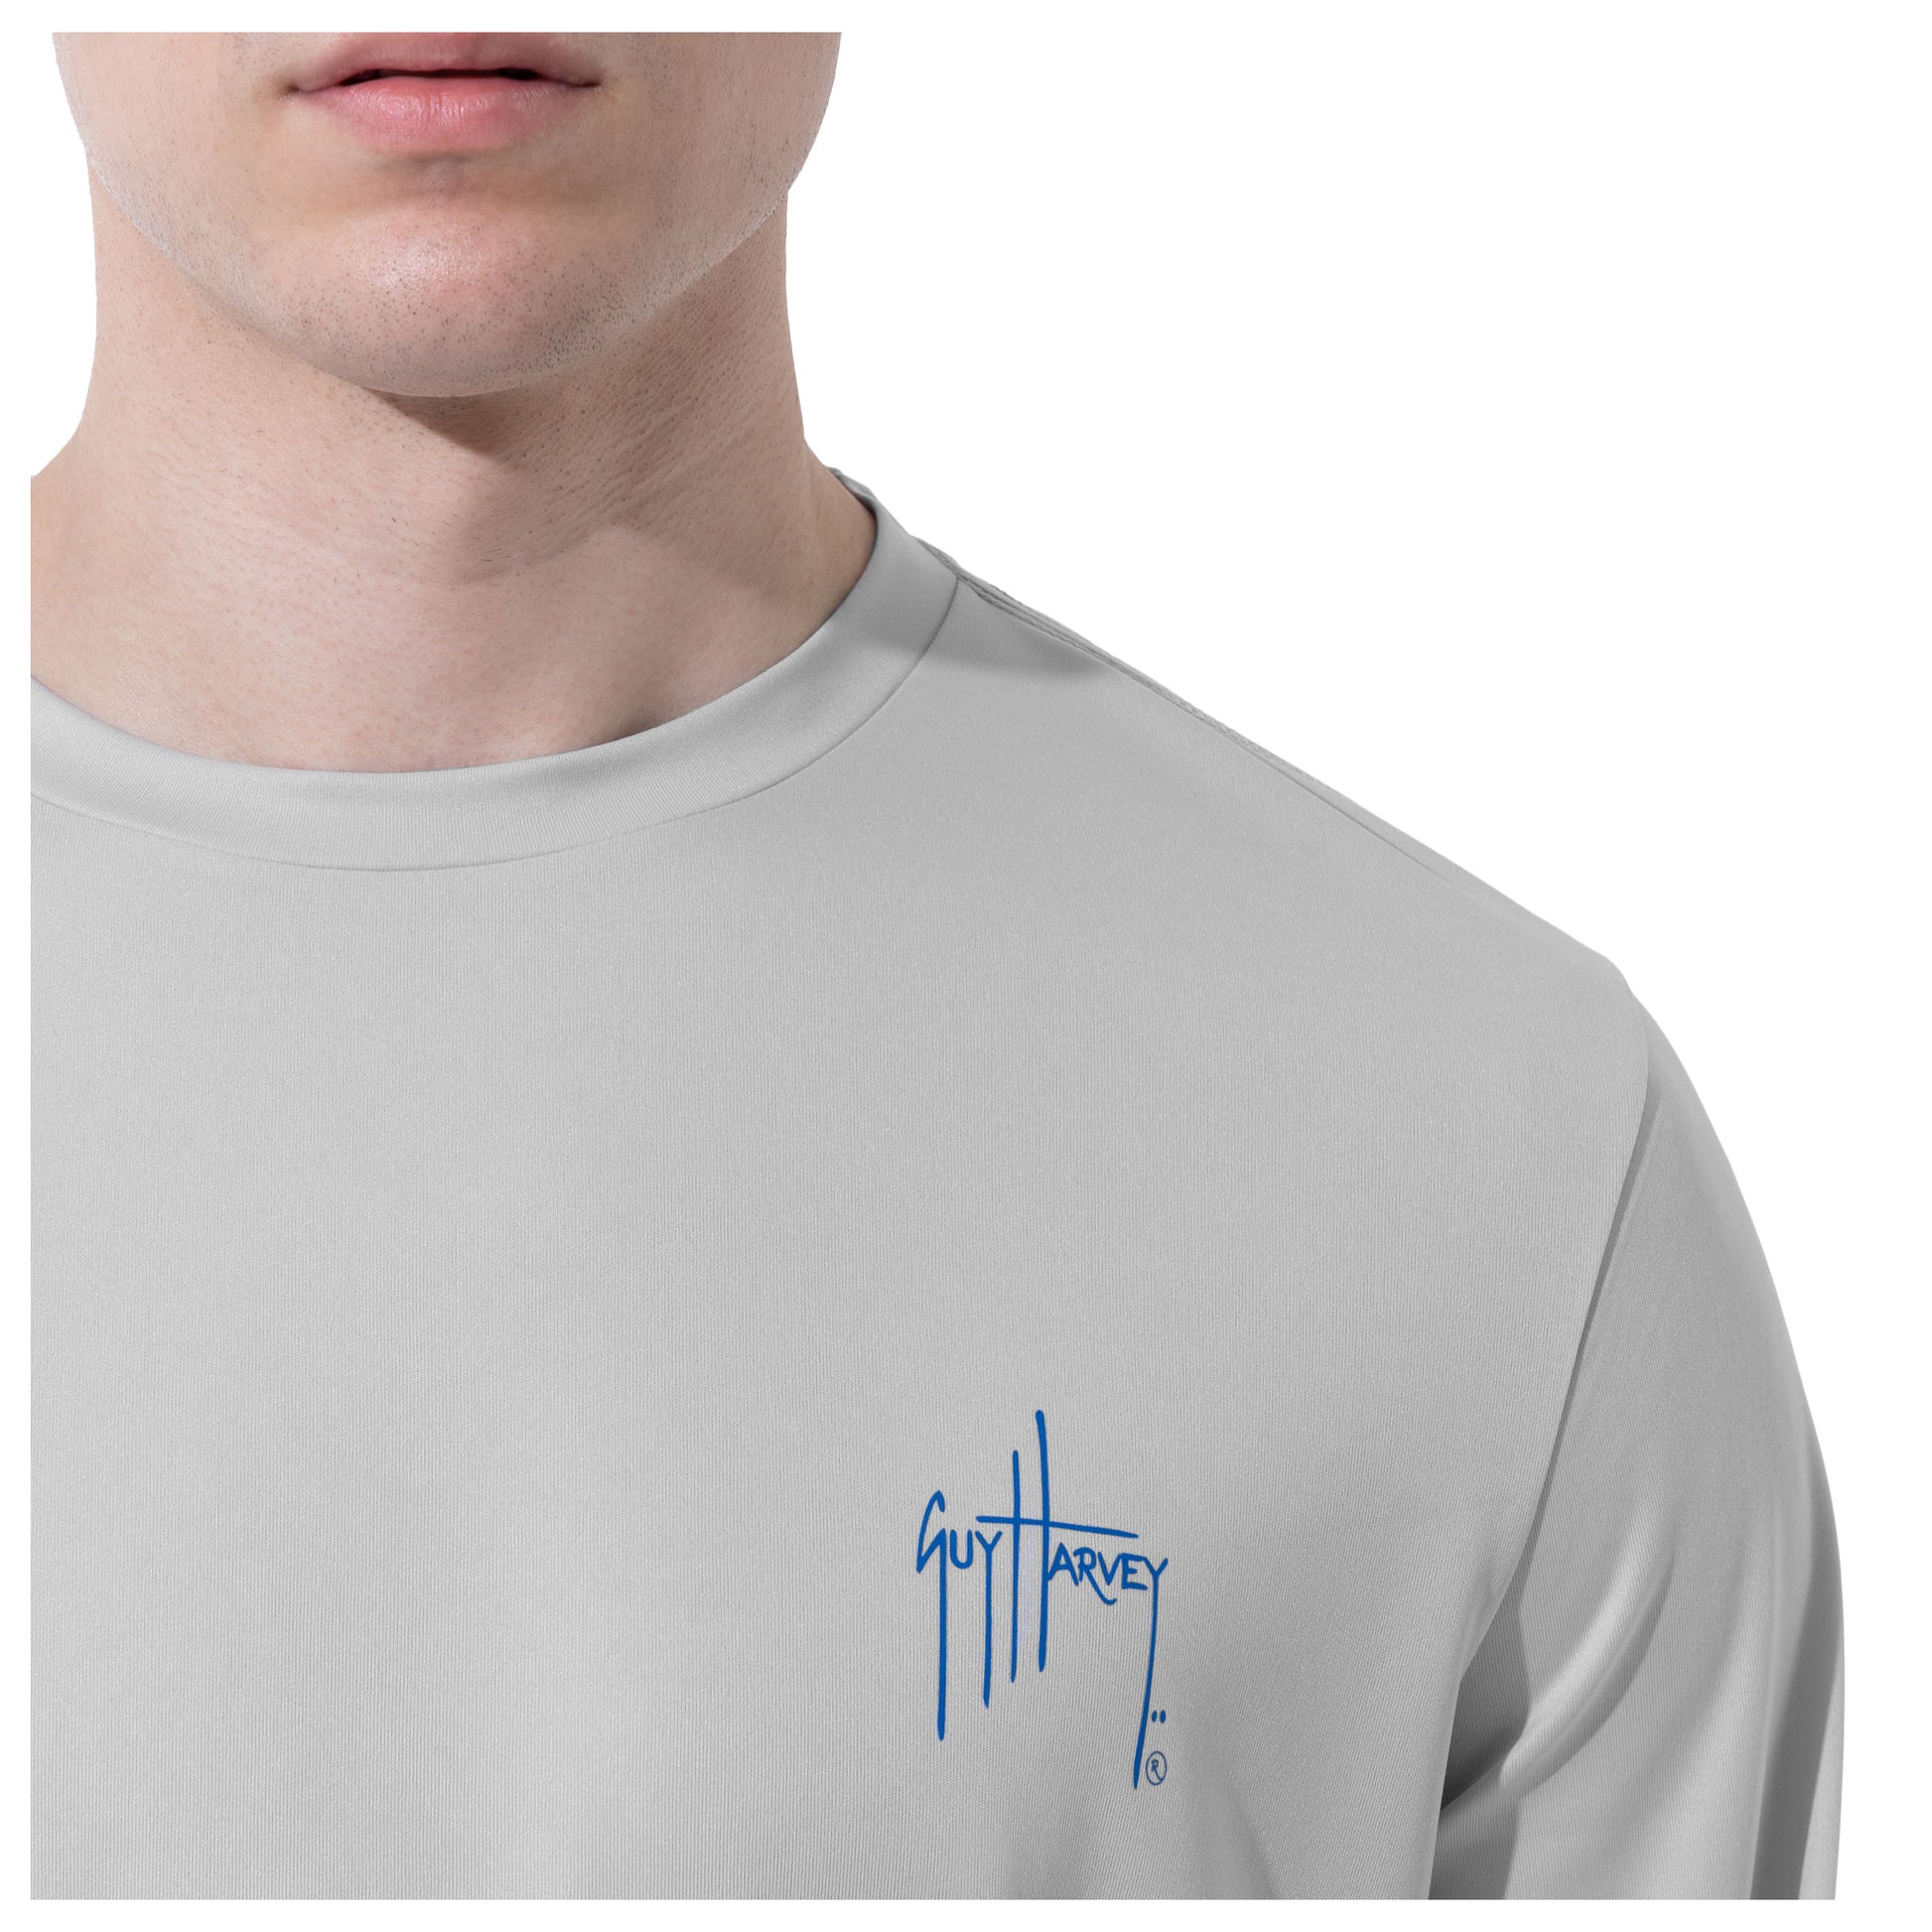 Men Long Sleeve Performance Fishing Sun Protection with UPF 50 Plus. Color Grey Guy Harvey Signature on the Chest View 10